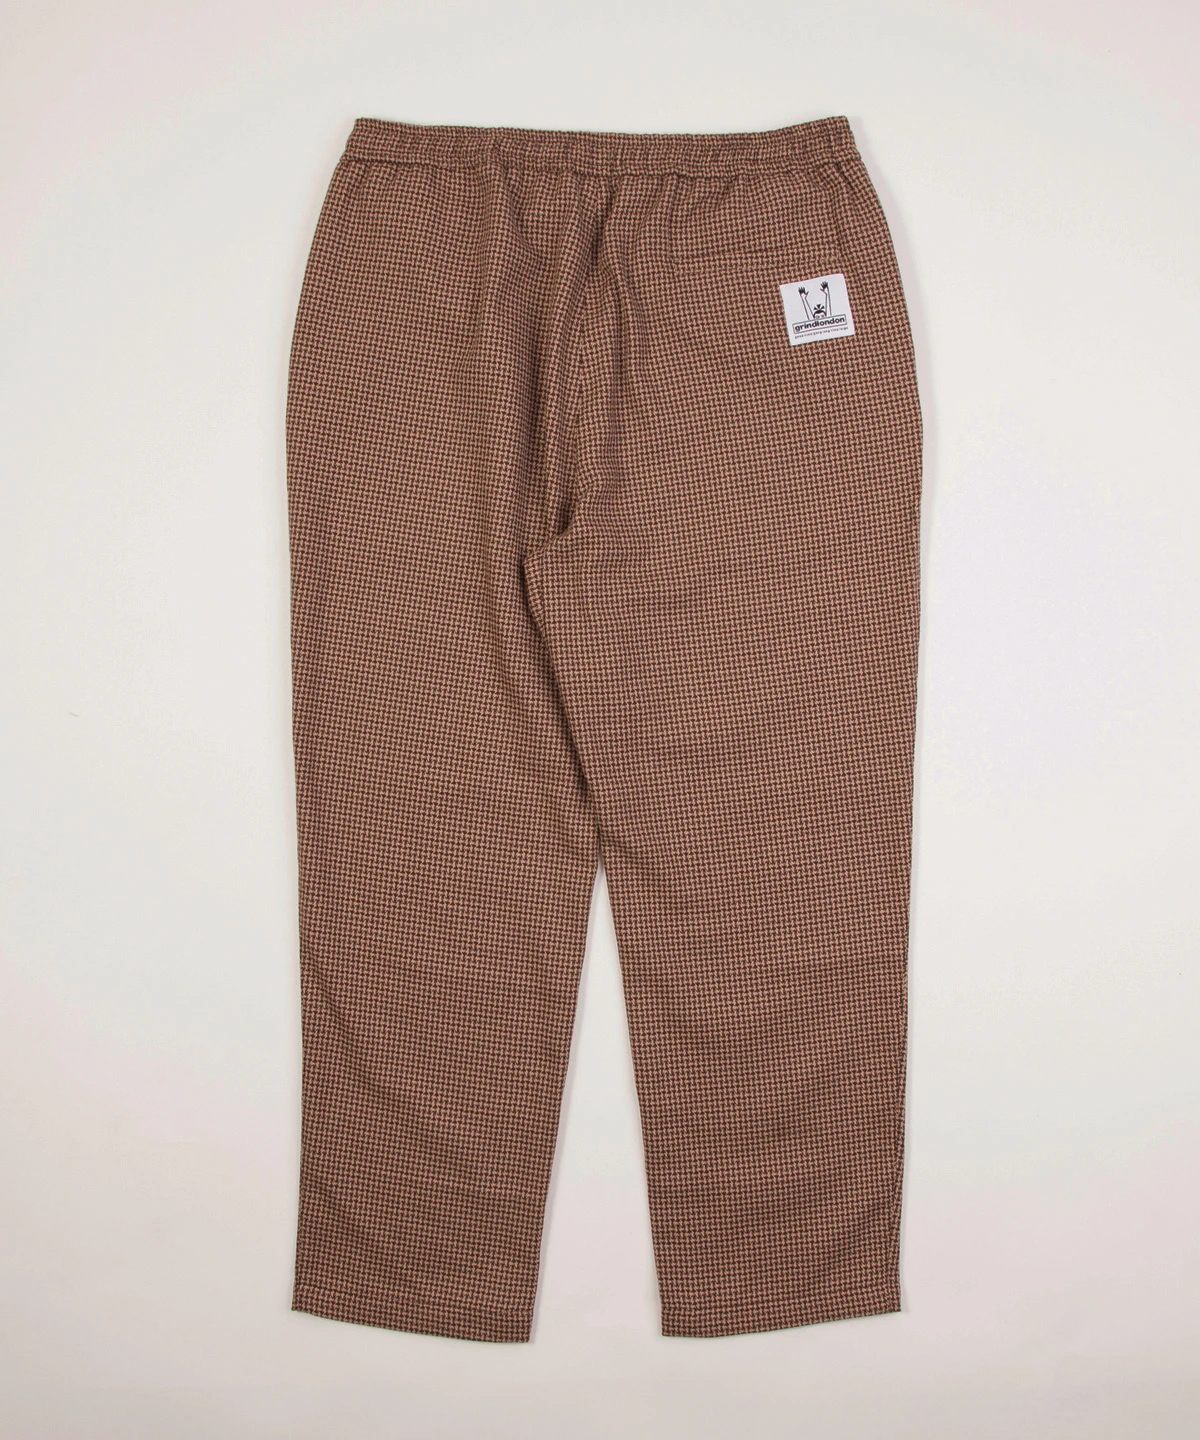 grindlondon autumnal dogtooth 100% cotton relaxed trouser brown